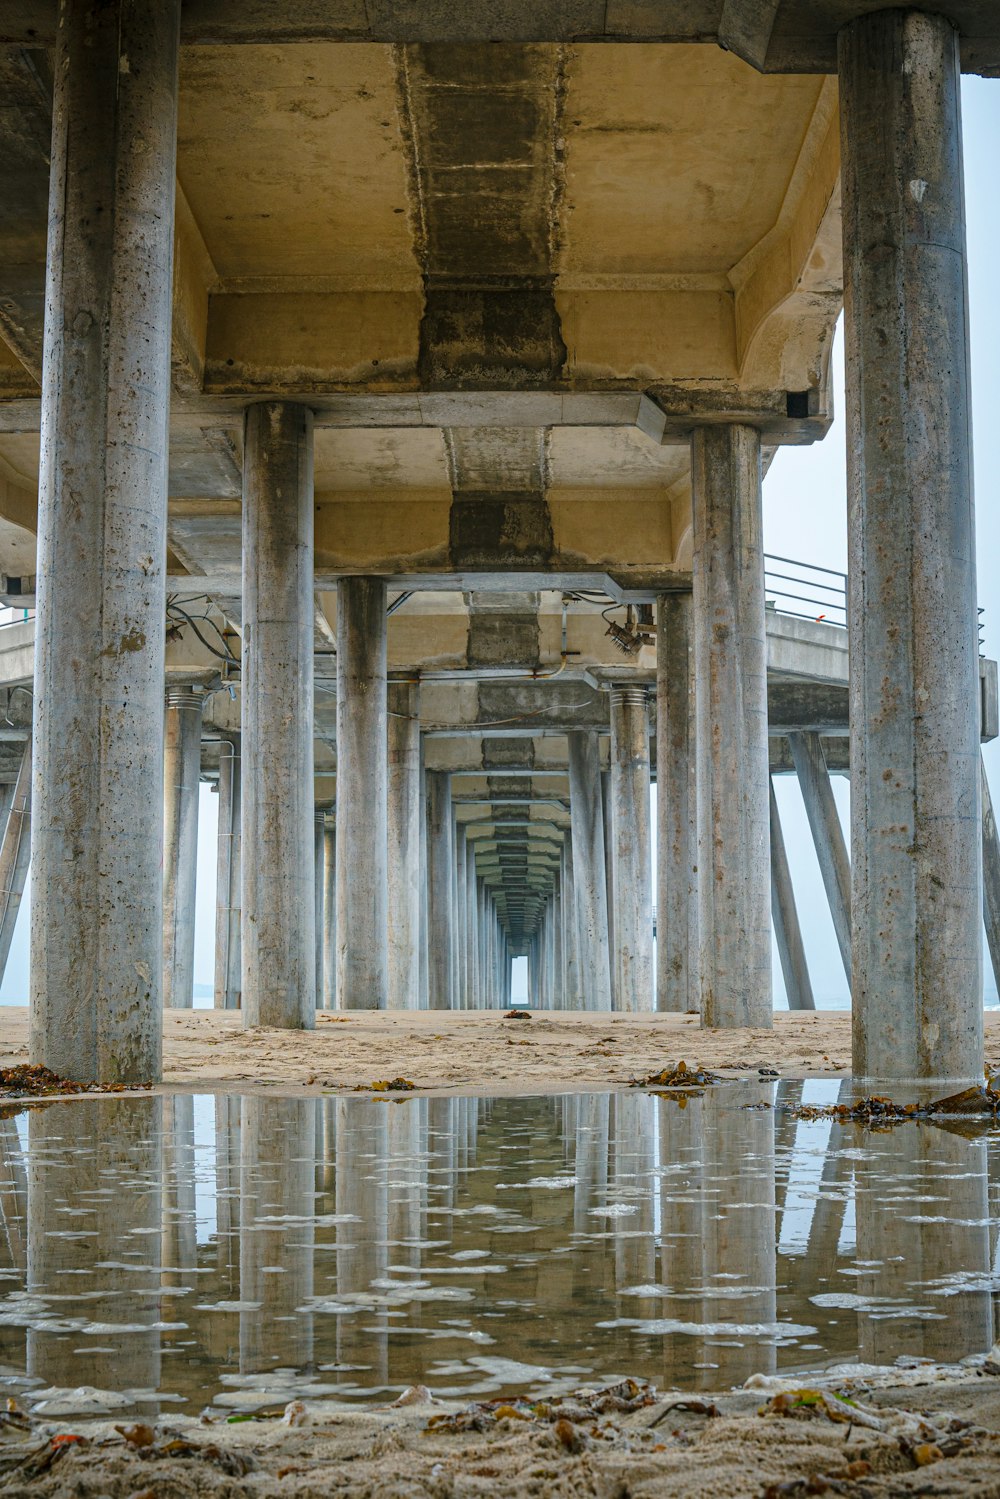 the underside of a pier with water under it